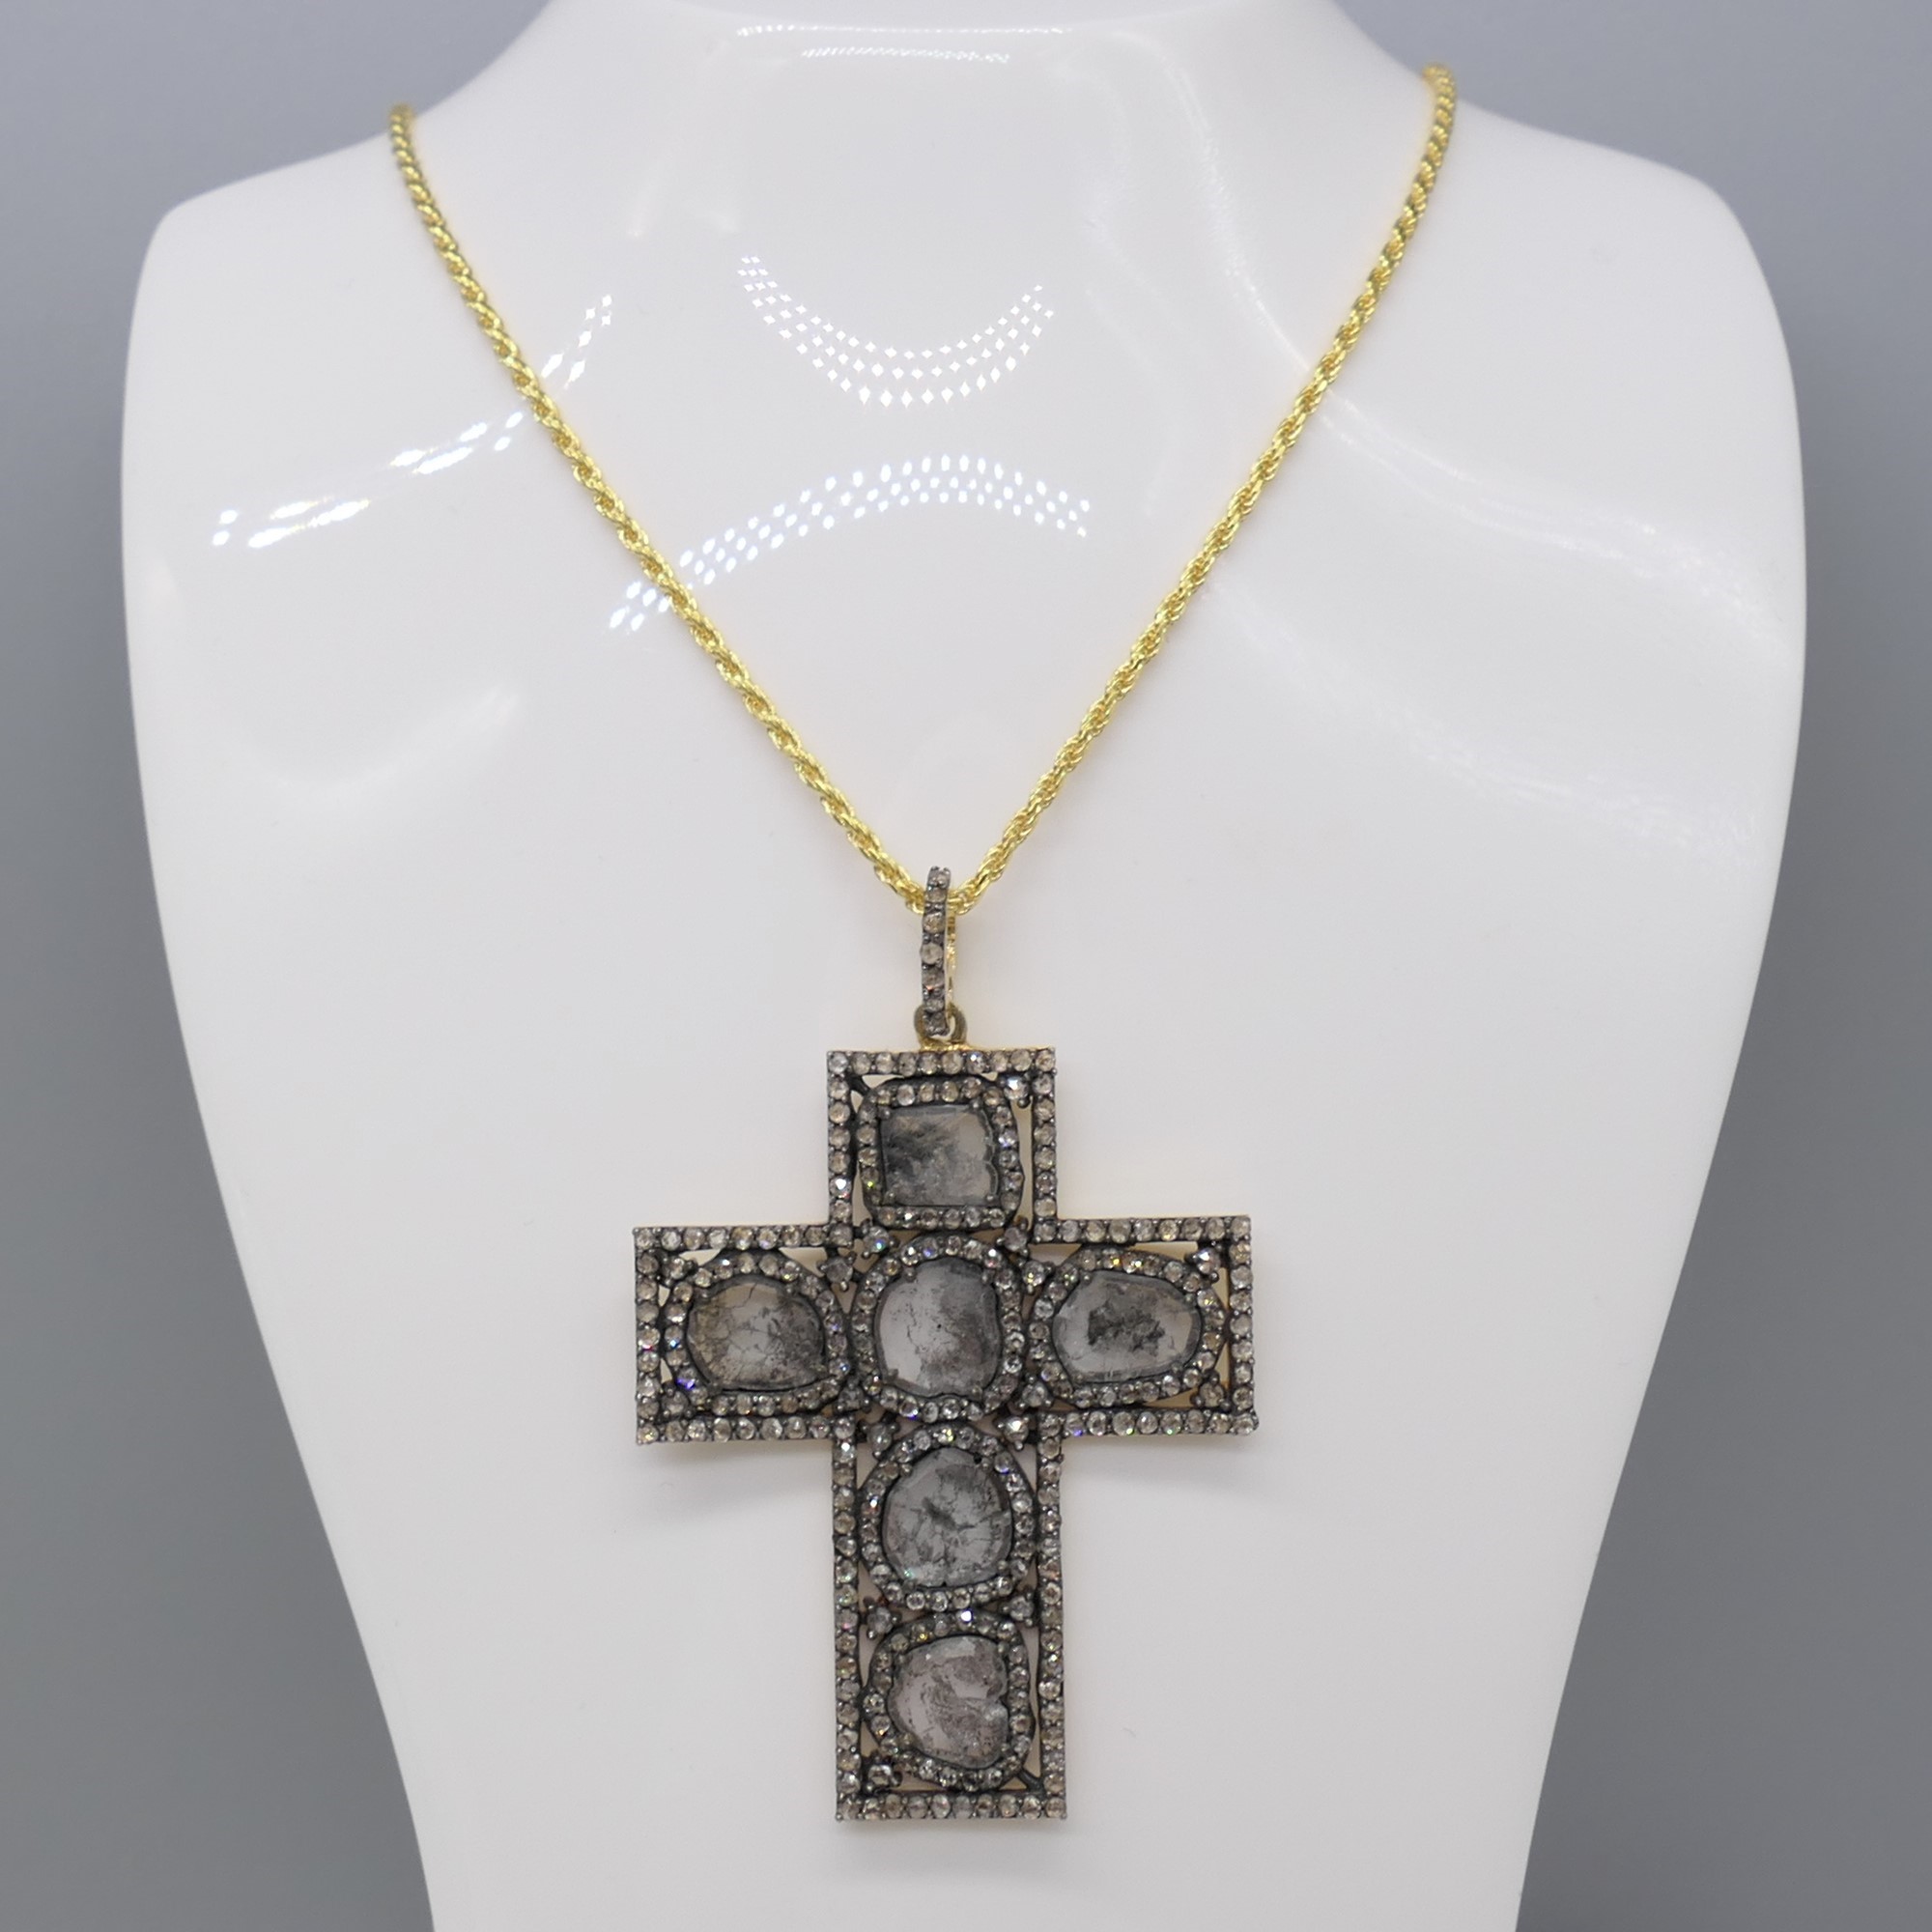 One-off 3.80 carat large diamond cross necklace wi - Image 5 of 6